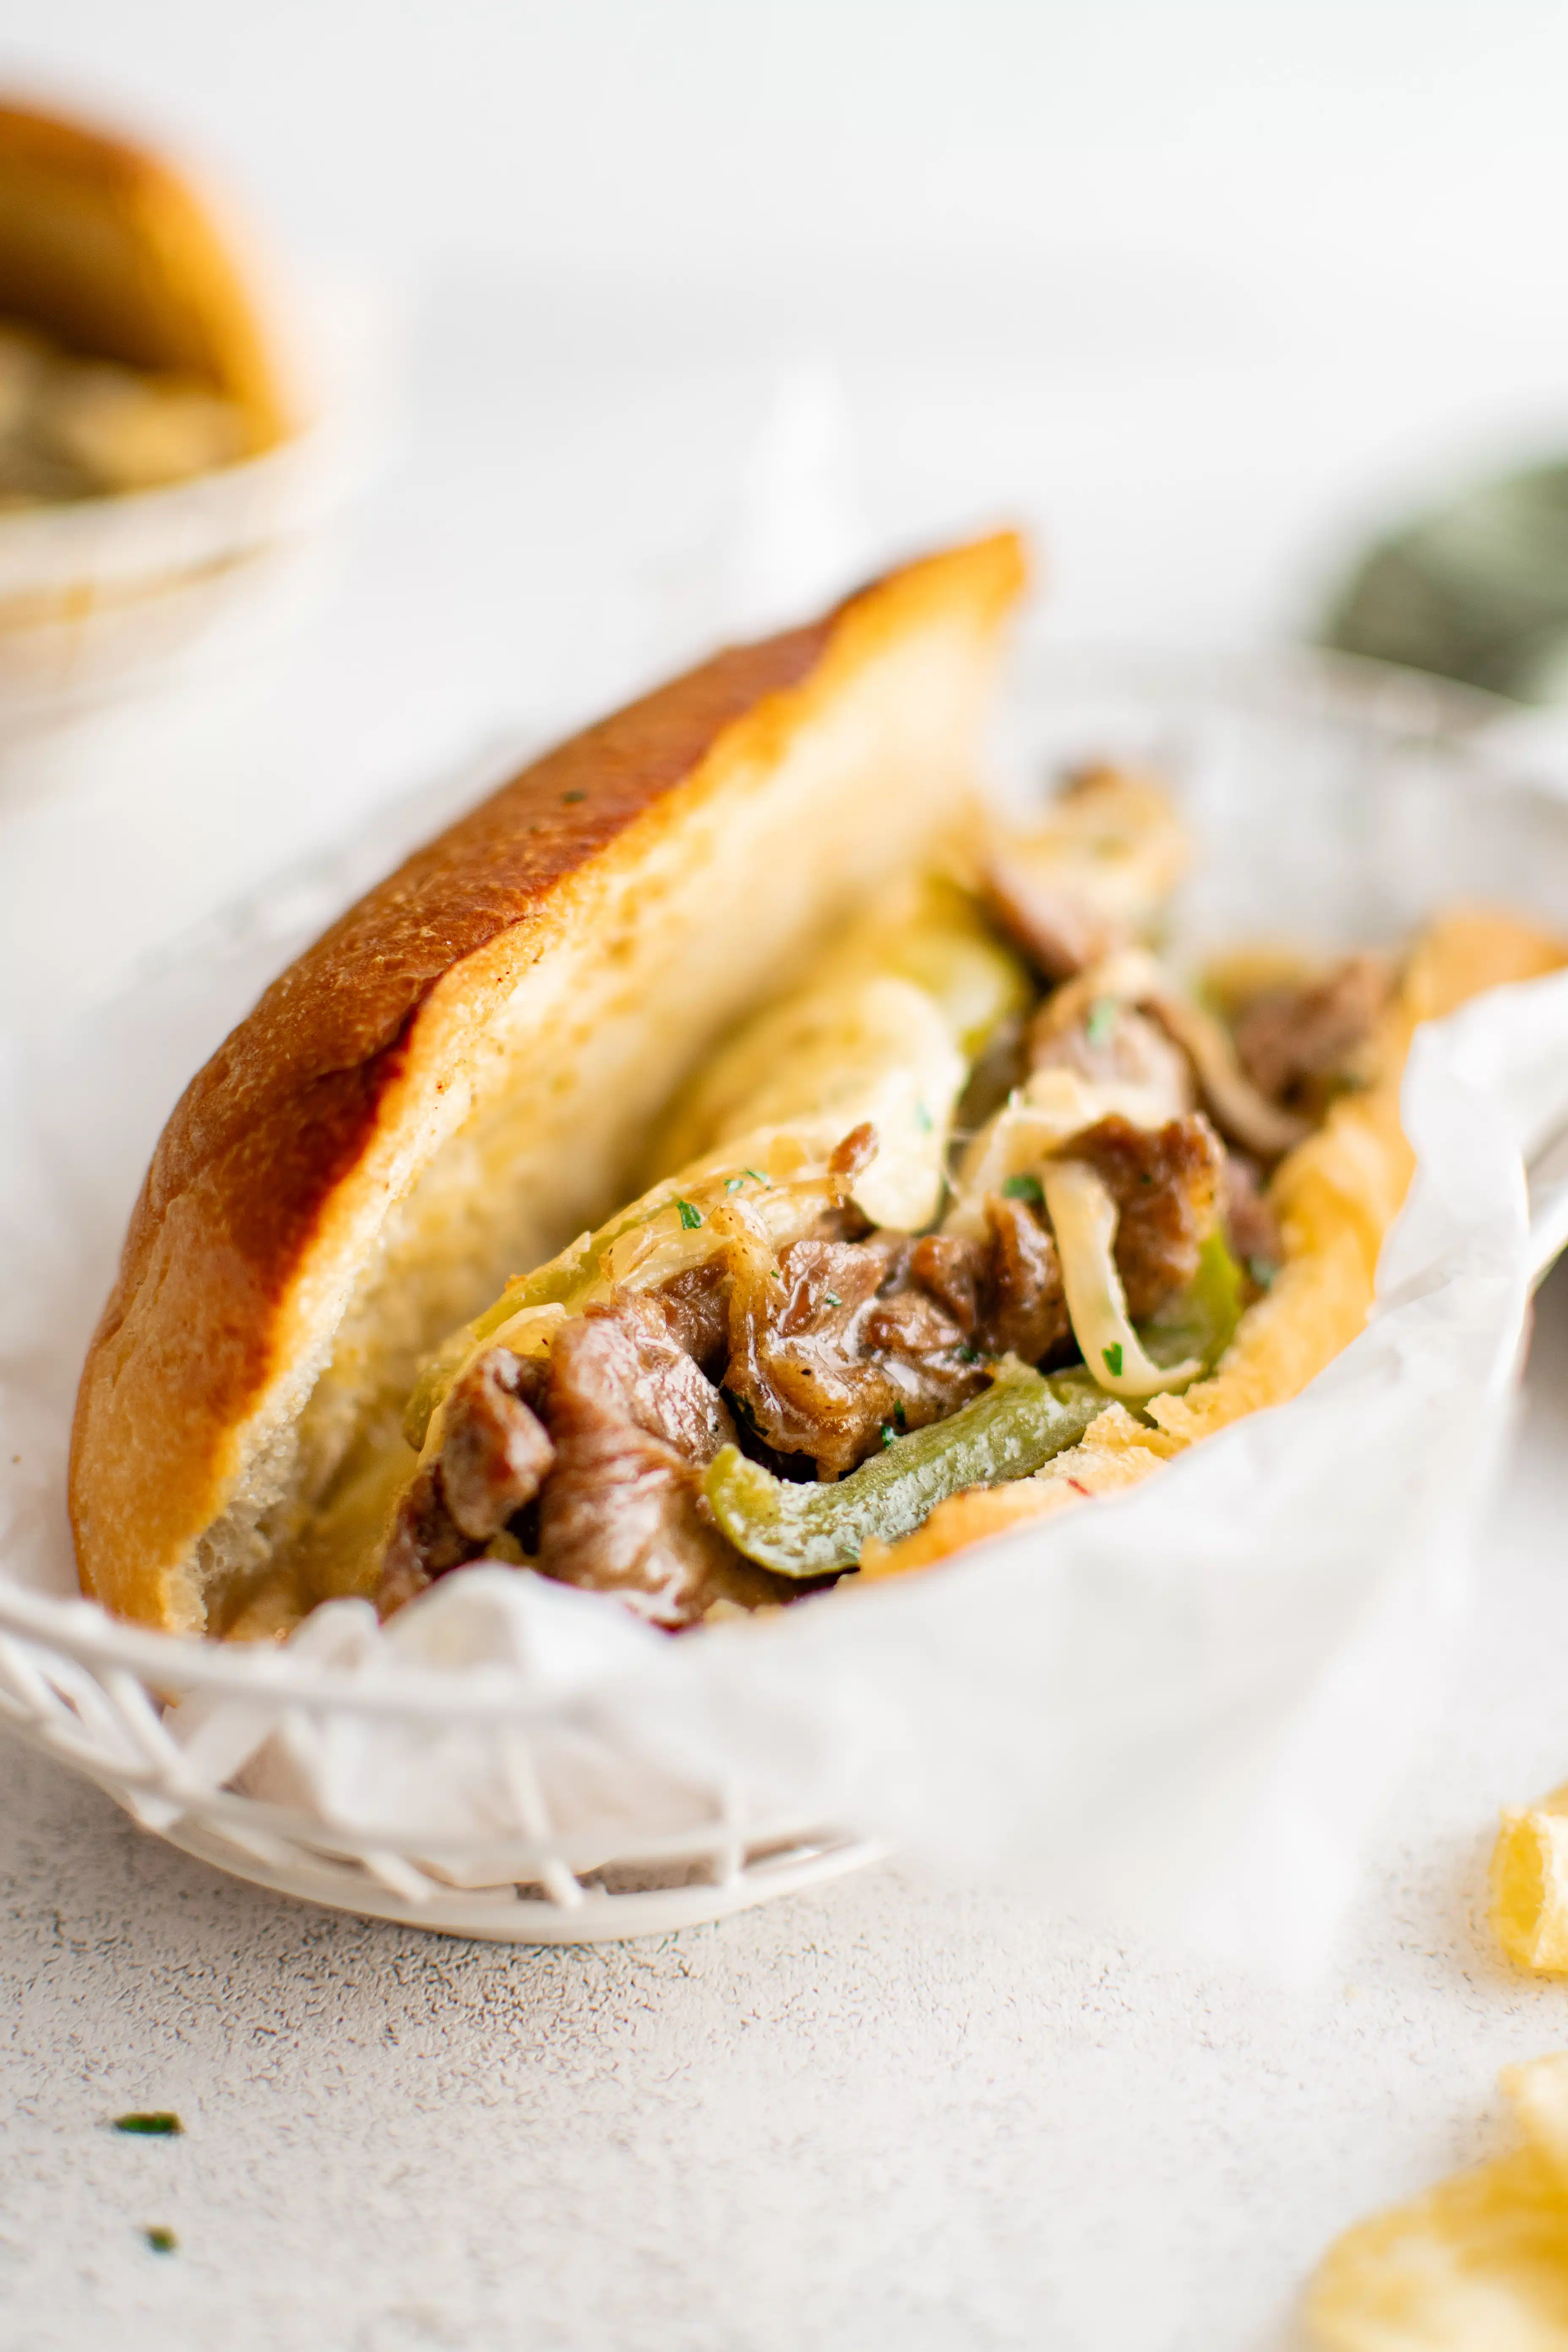 Toasted hoagie roll filled with cheesesteak and green bell pepper in a white deli basket.